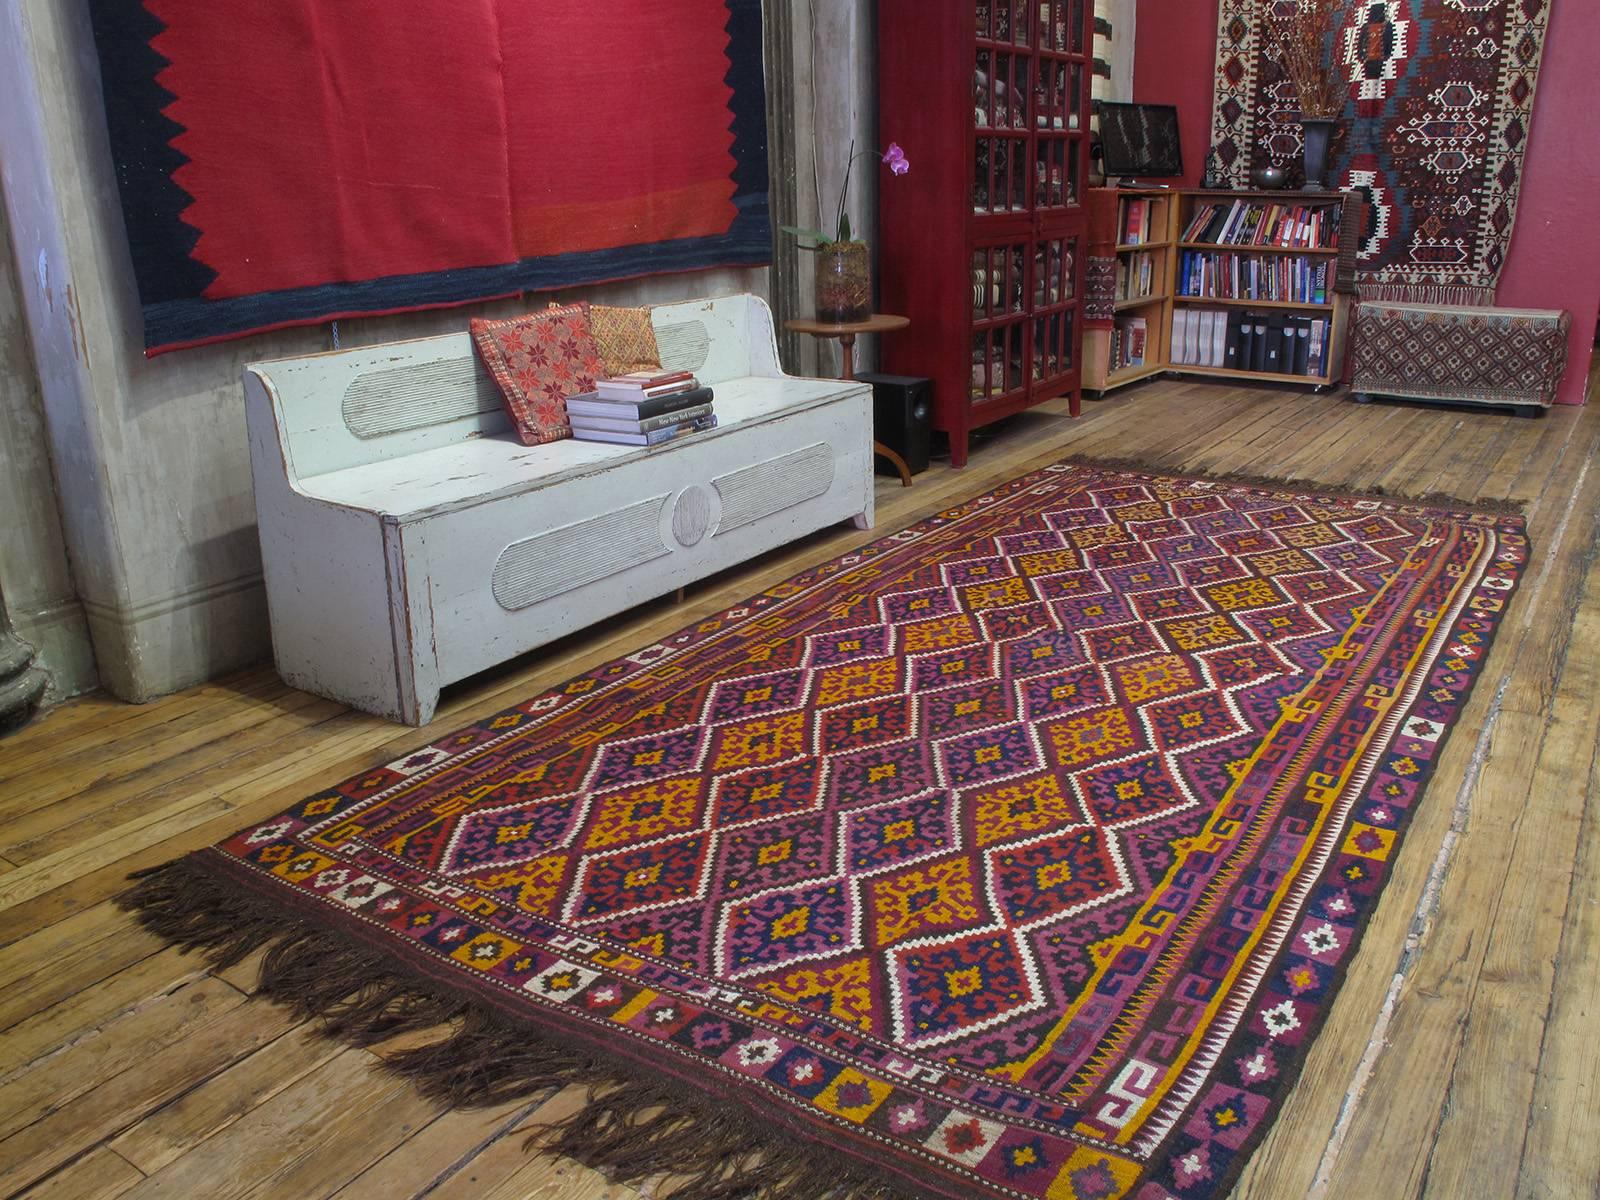 Uzbek Kilim rug. A striking tribal flat-weave rug from NW Afghanistan with crisp drawing and vibrant colors.